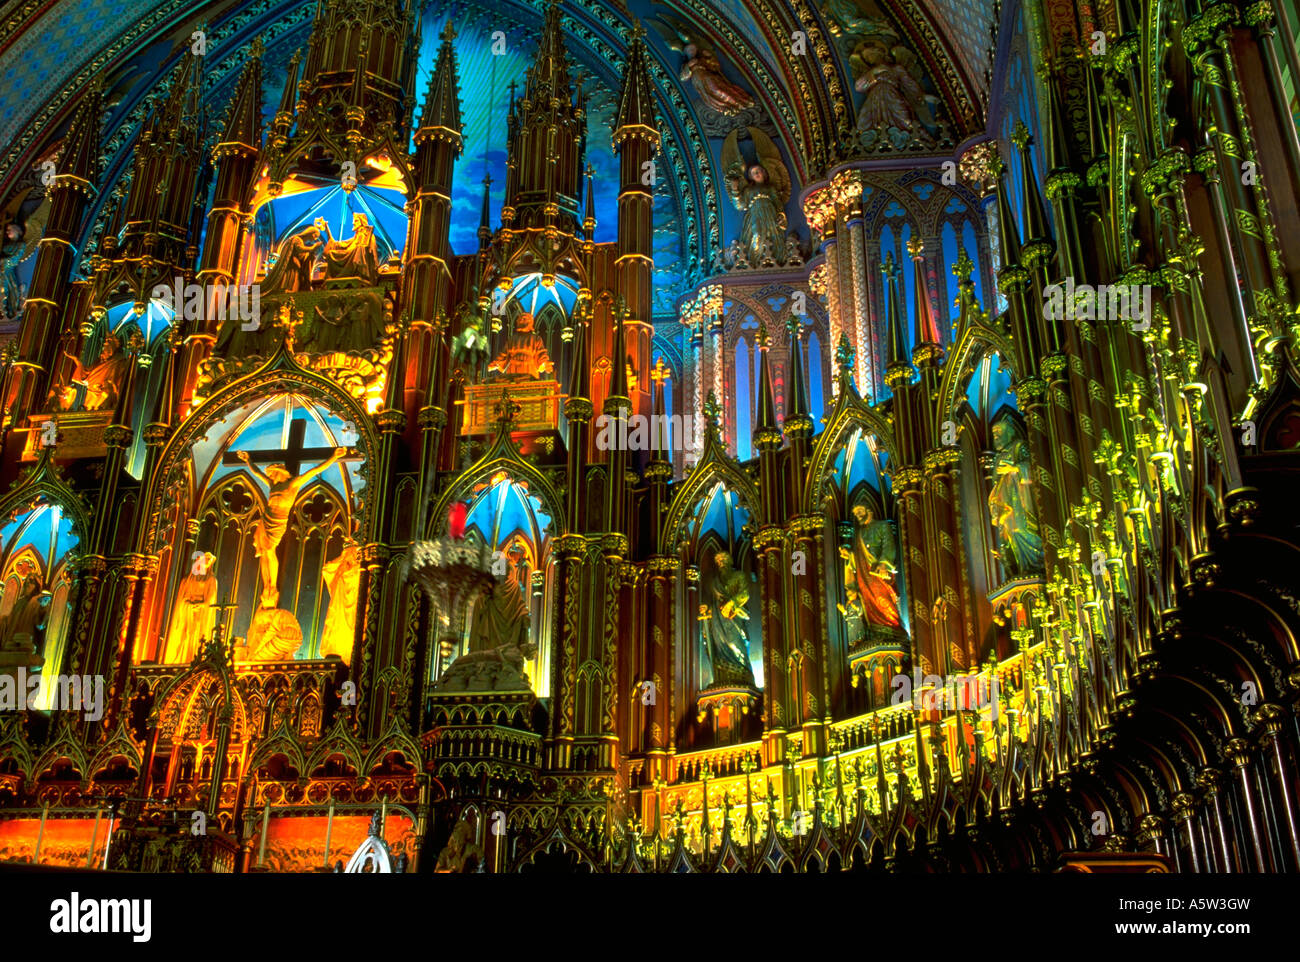 Painet hl1243 interior basilique notredame montreal canada church cathedral roman catholic altar cross crucifixion colors Stock Photo